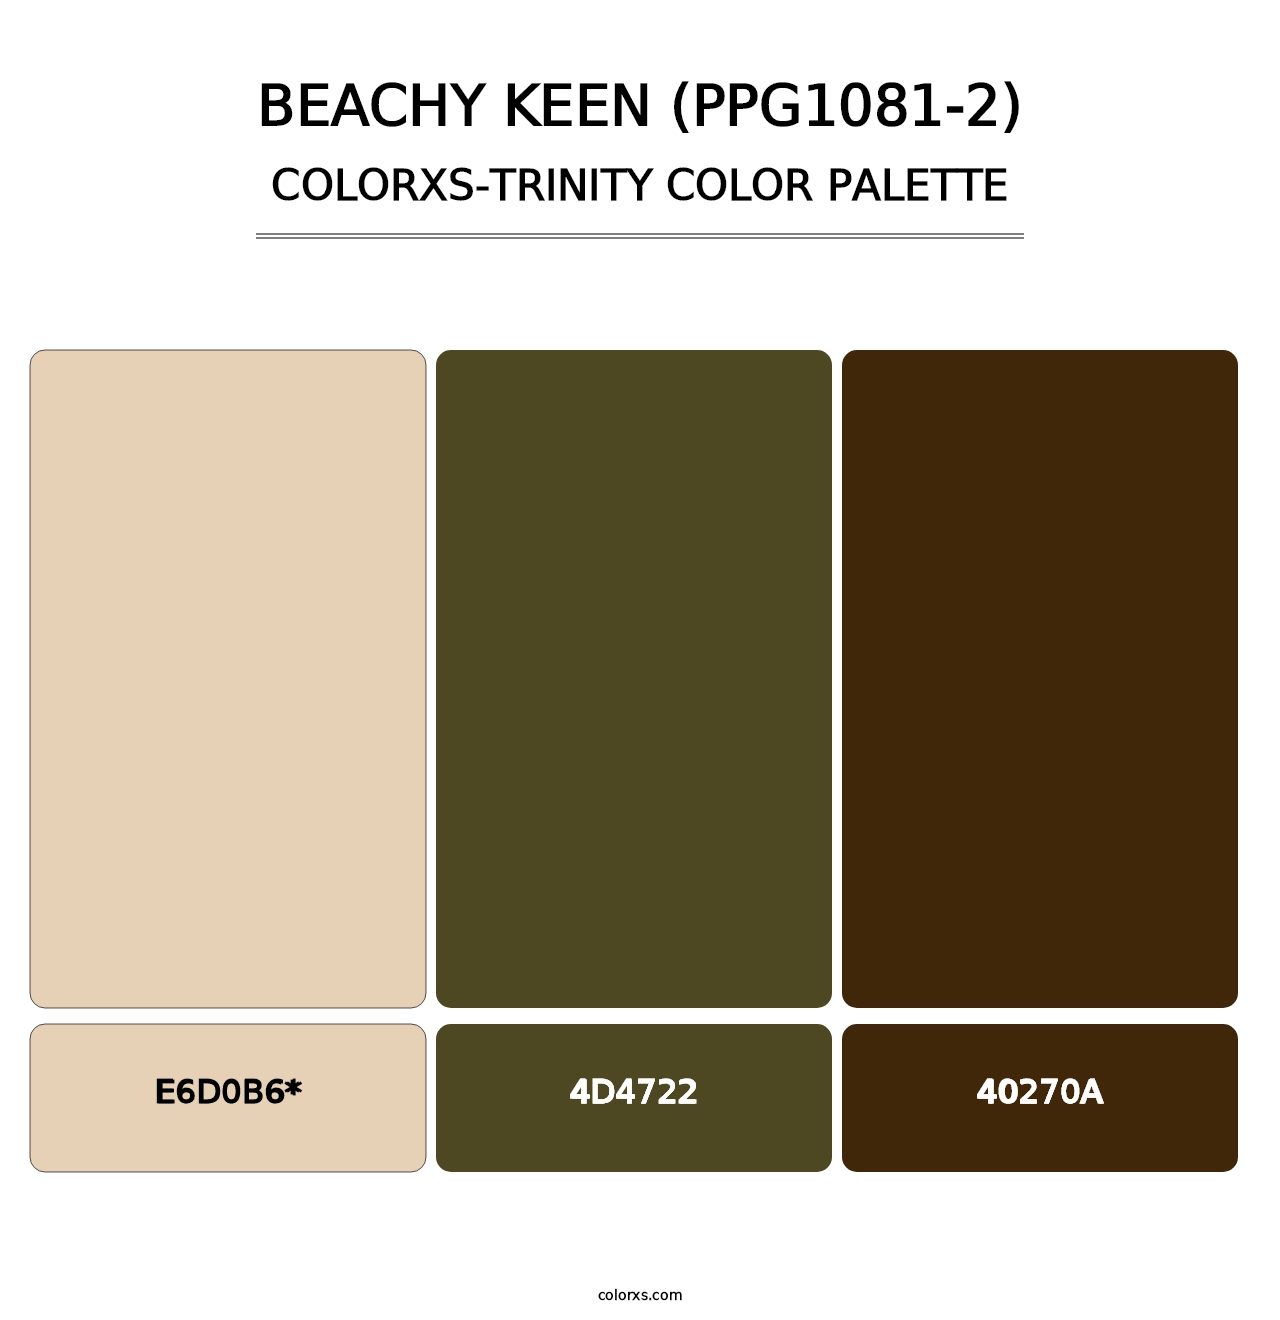 Beachy Keen (PPG1081-2) - Colorxs Trinity Palette